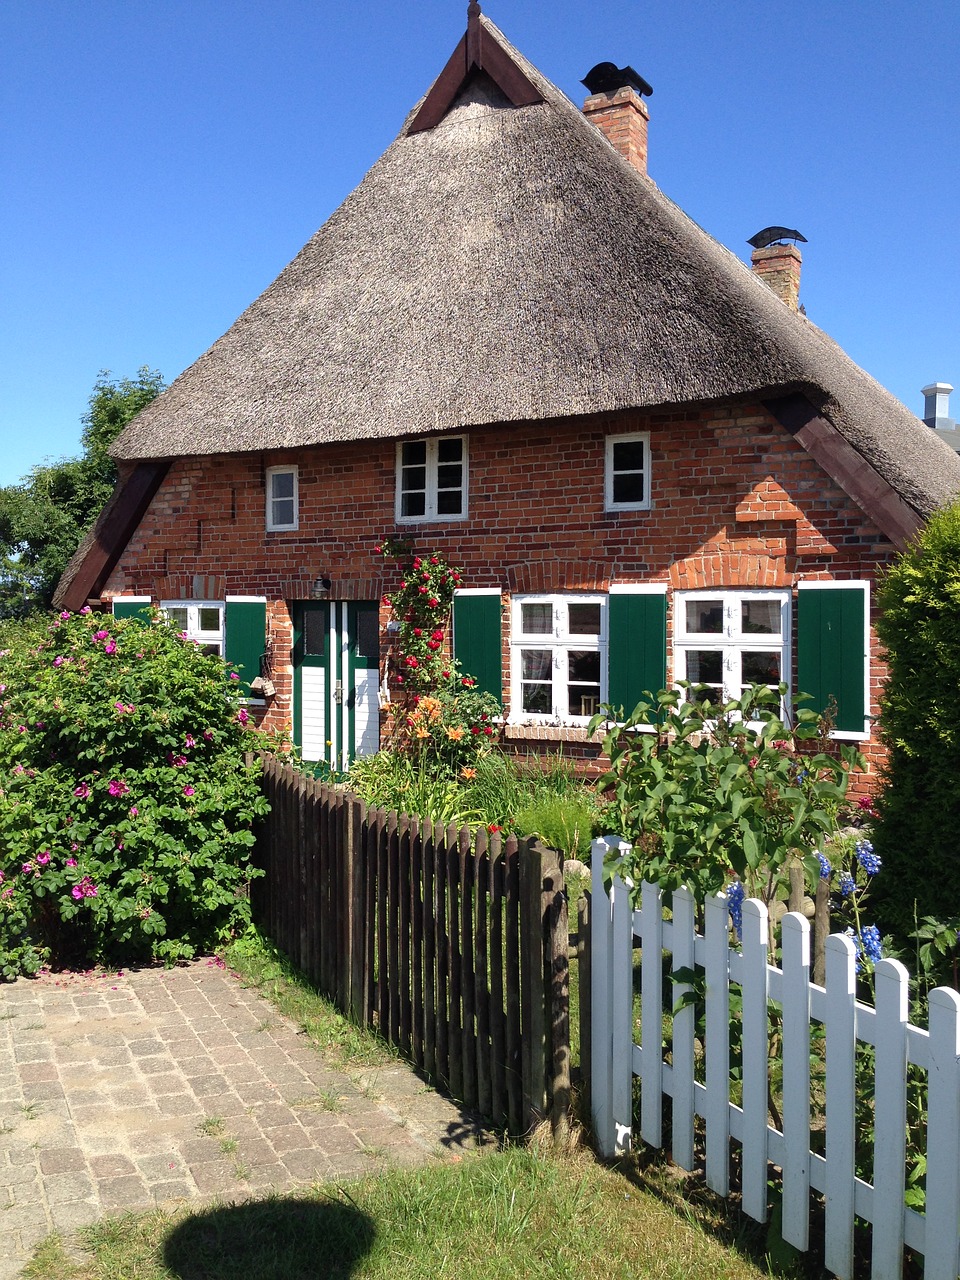 thatched roof baltic sea thatched free photo